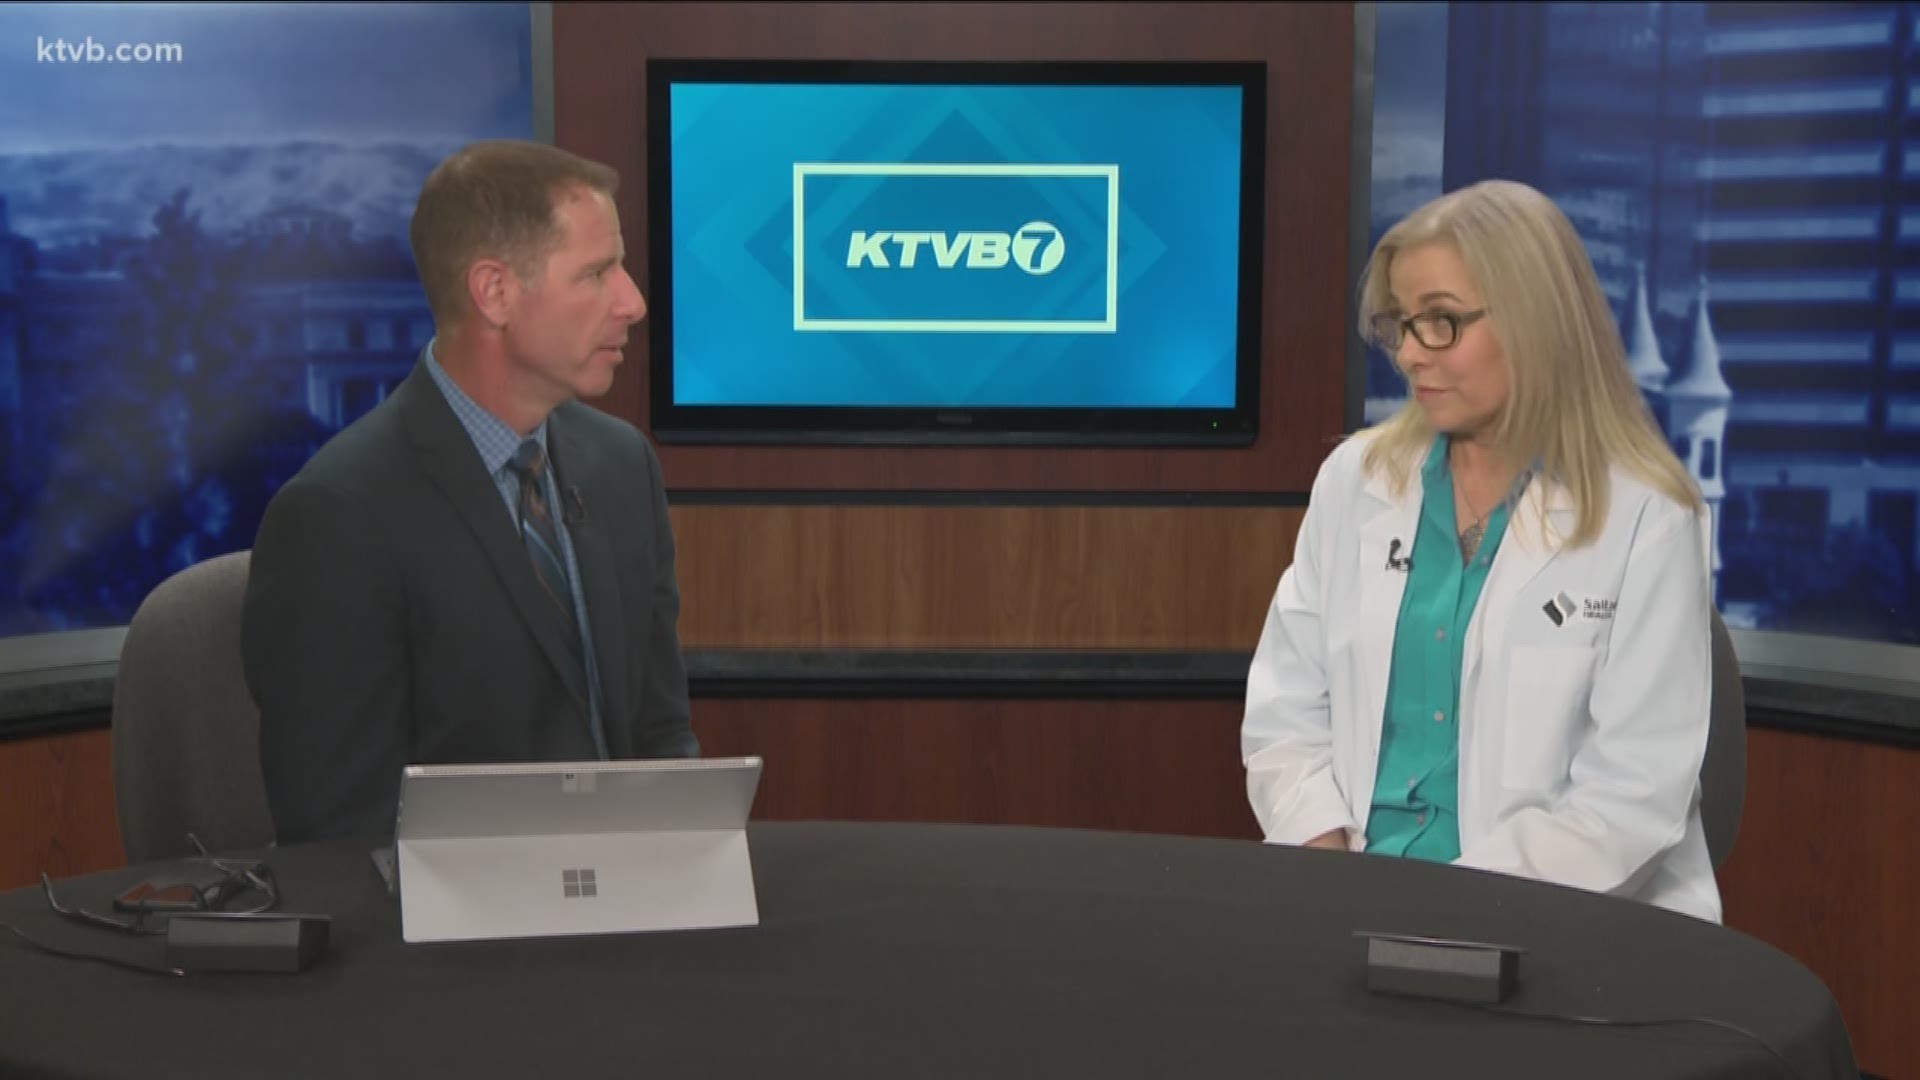 Dr. Wendy Siegersma with Saltzer Health discusses warning signs of skin cancer, and ways to prevent it in the first place. A free Healthy Skin Check is happening Friday, May 24, in Nampa.